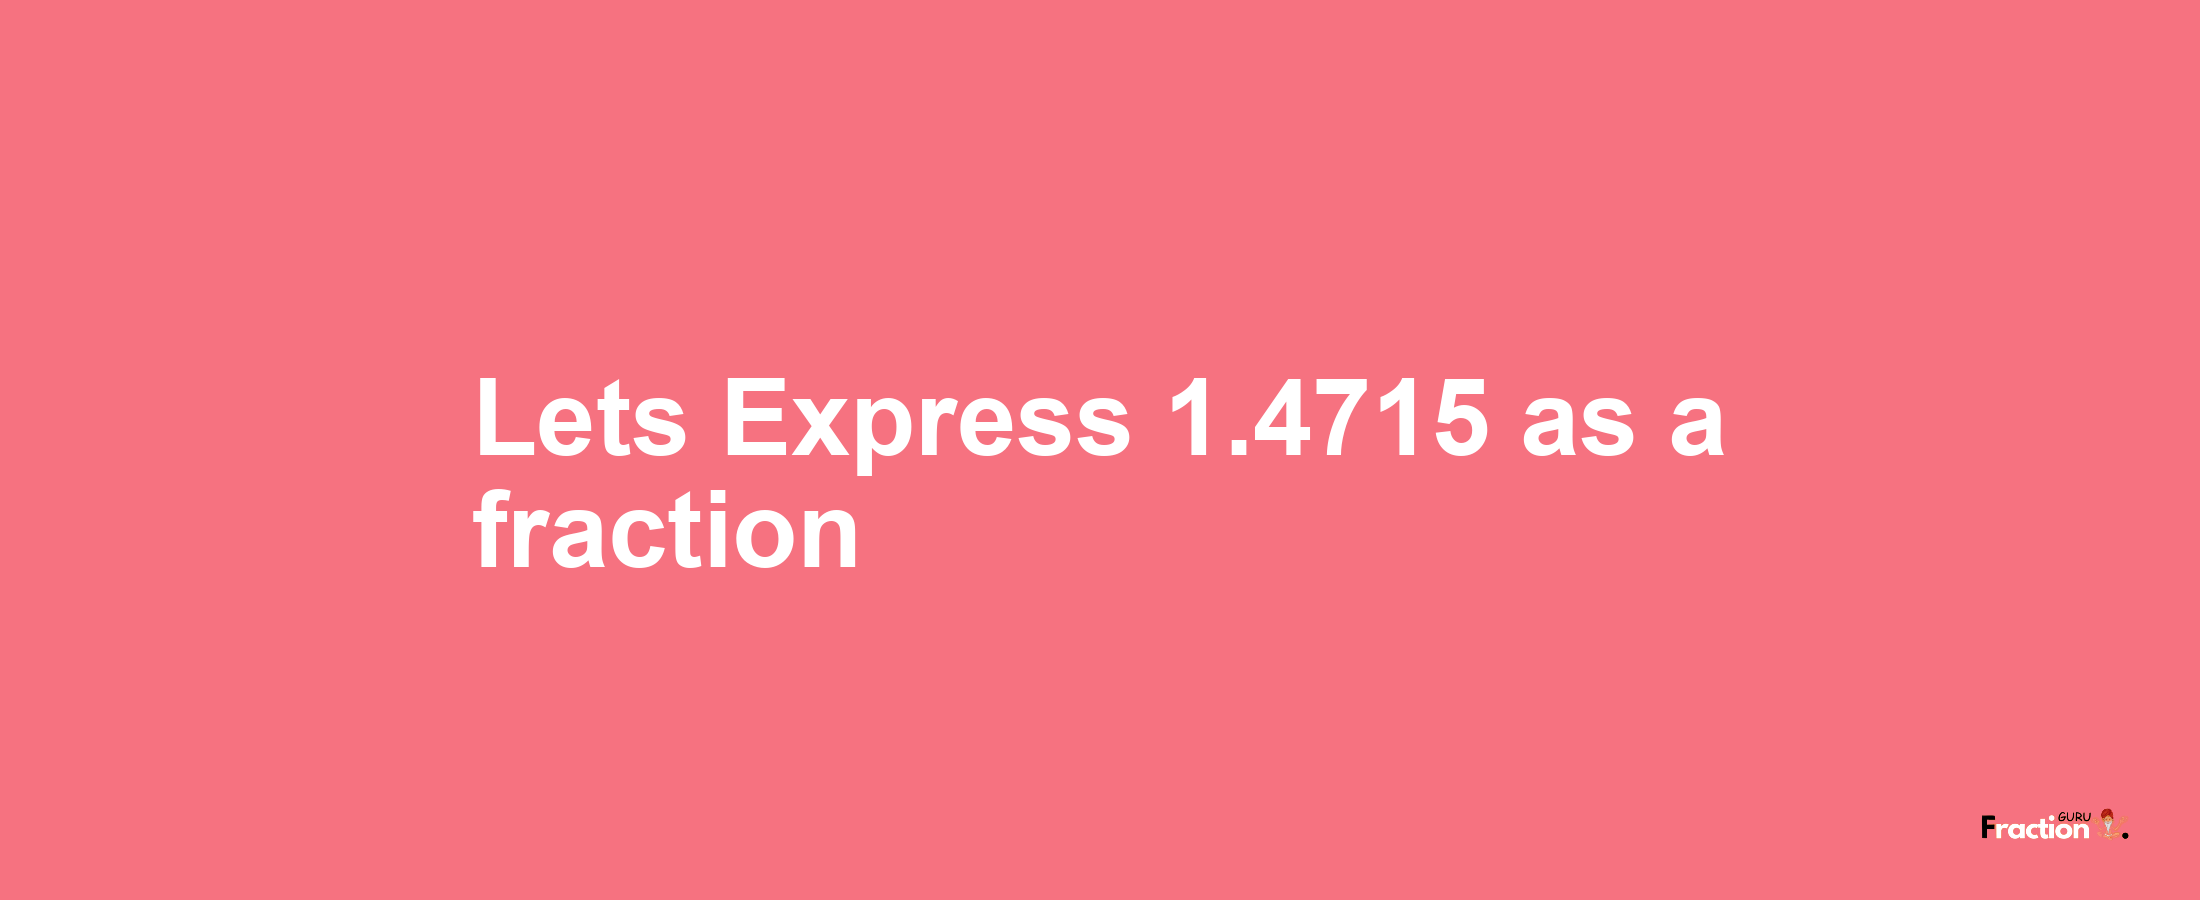 Lets Express 1.4715 as afraction